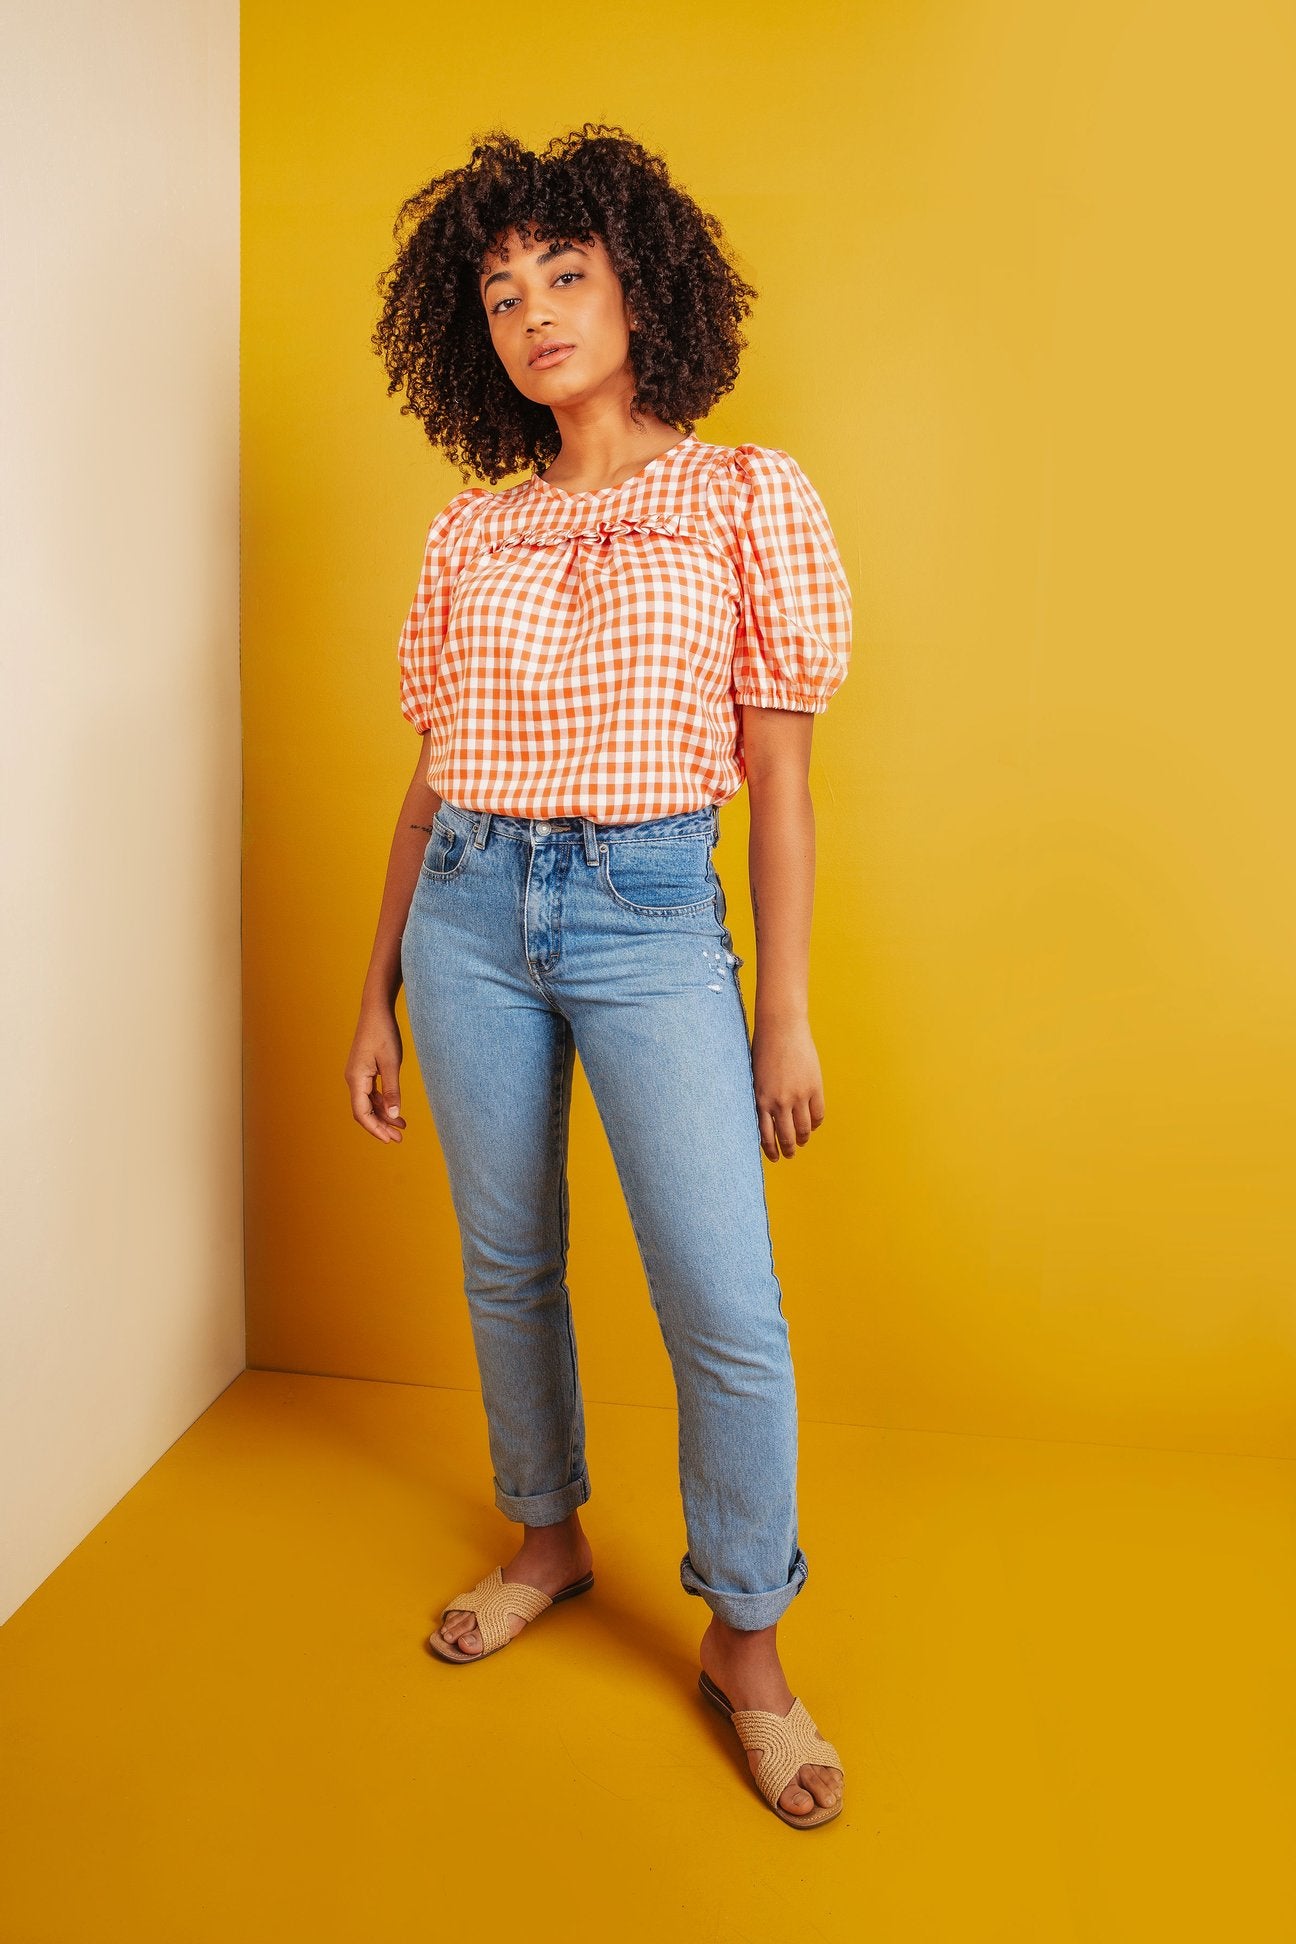 FRIDAY Pattern Co - the Sagebrush Top Sewing Pattern